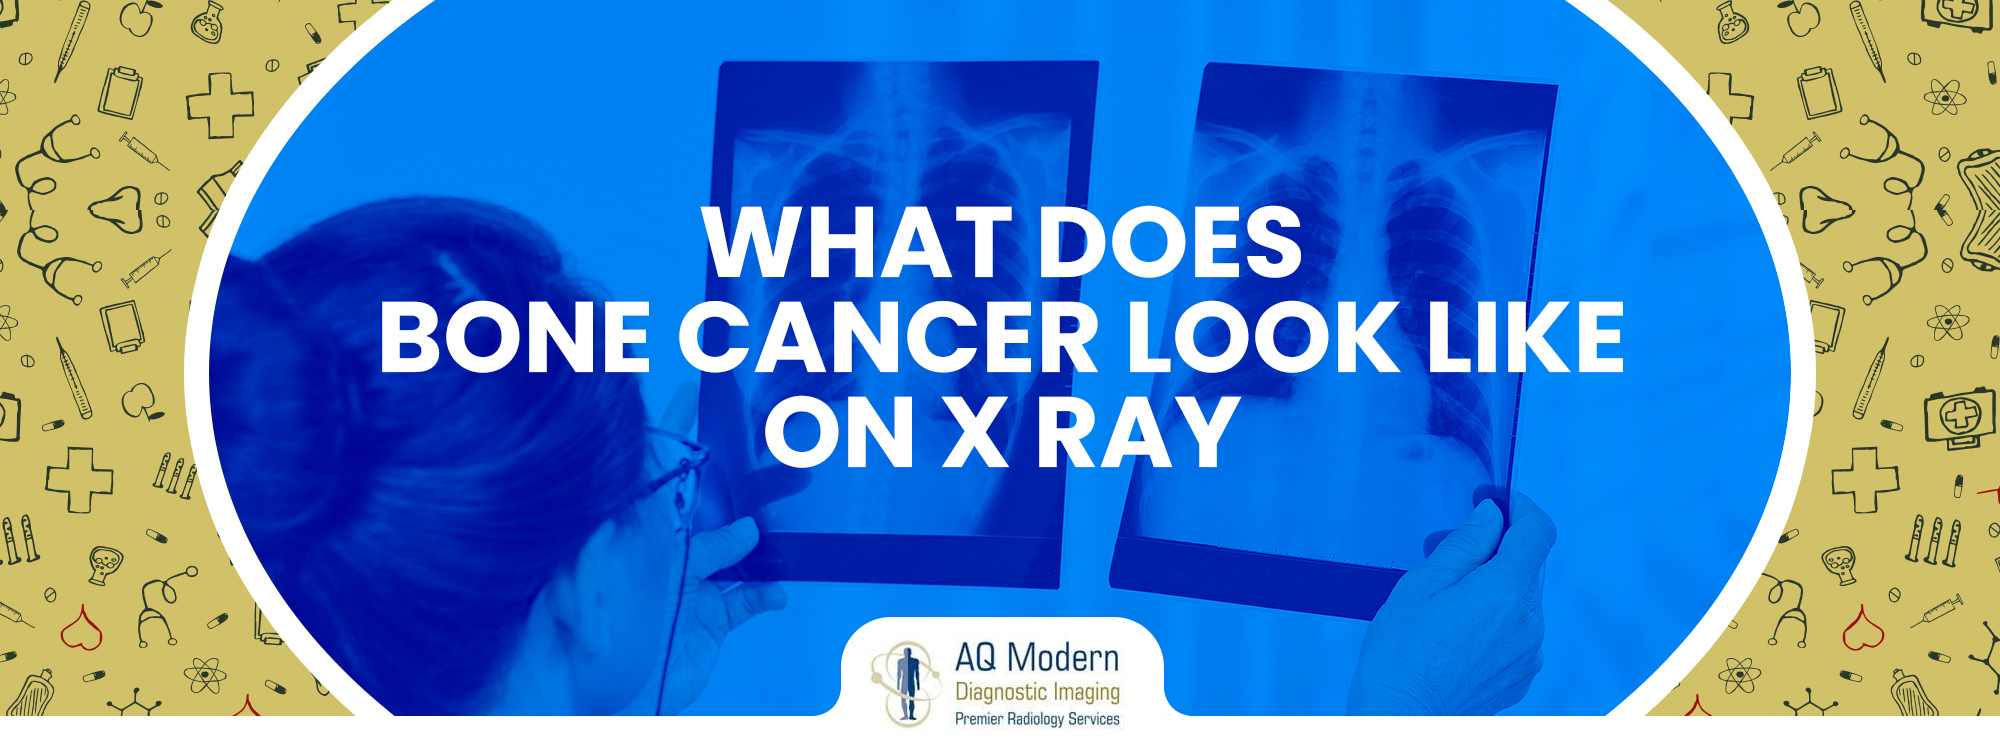 what does a bone cancer look like on a x ray